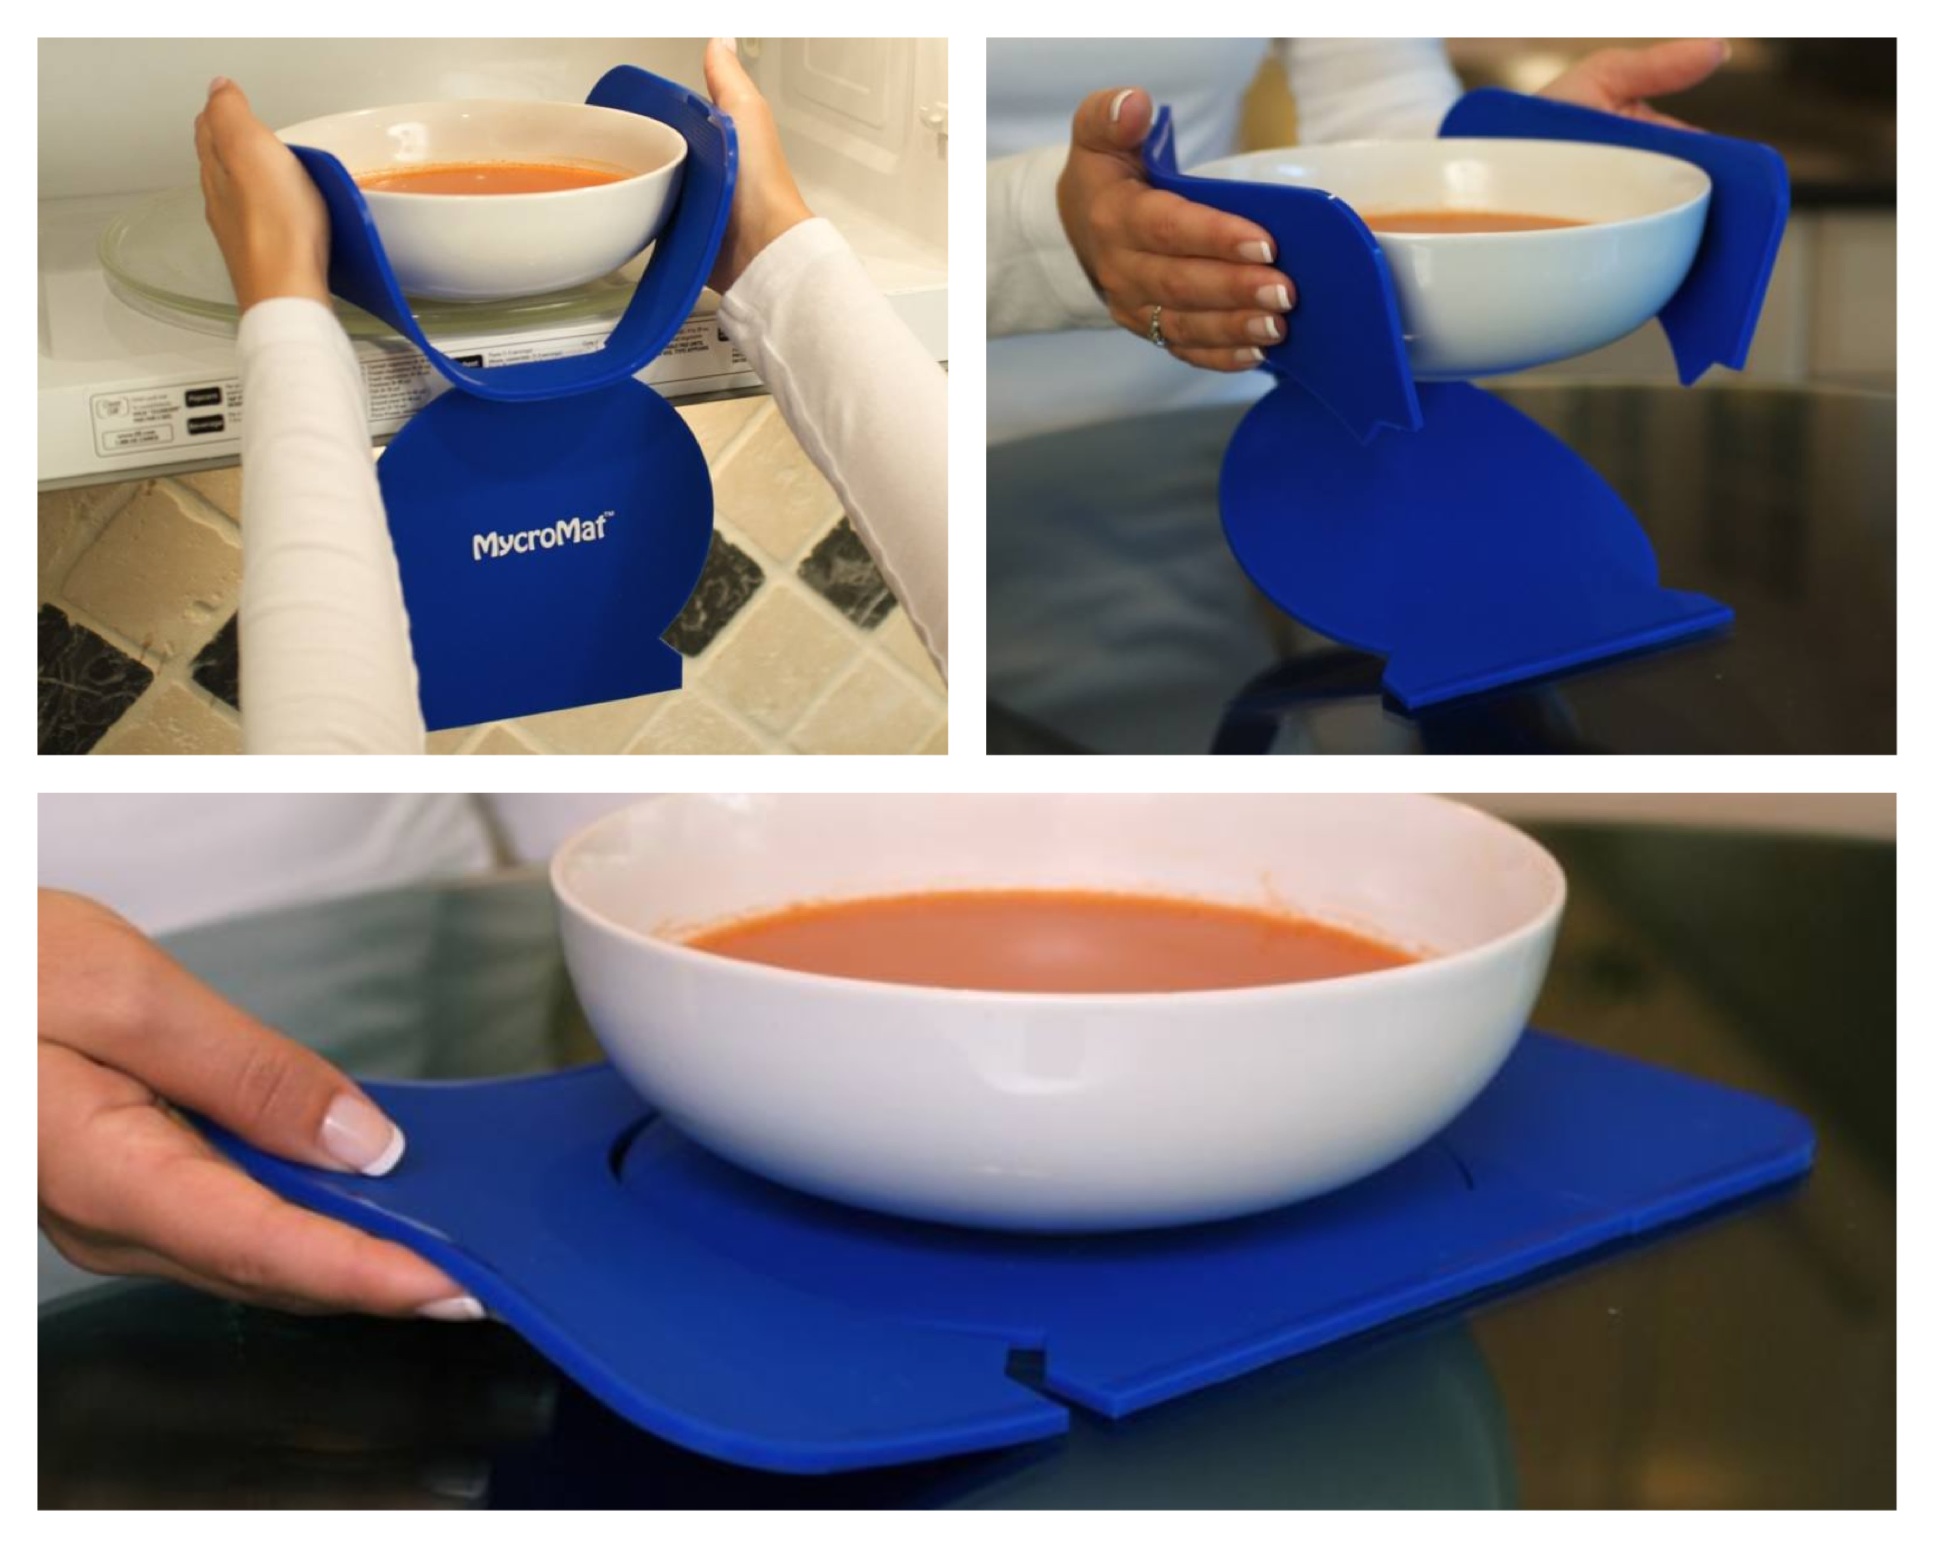 MycroMat, the newest silicone kitchen gadget that revolutionizes microwave cooking